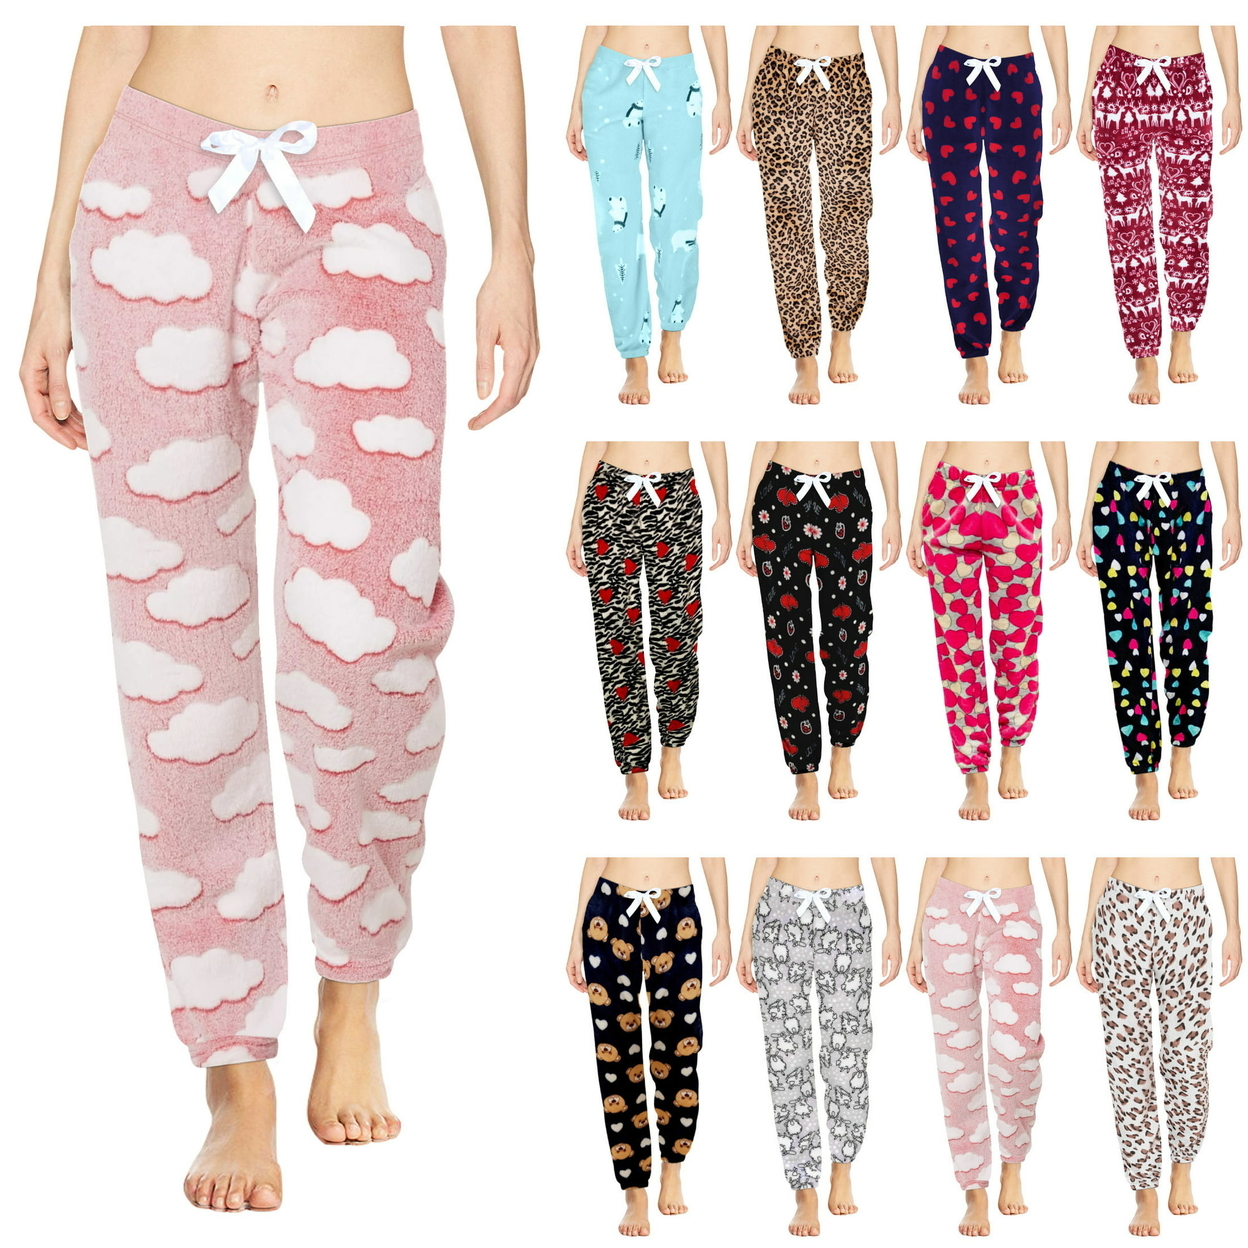 3-Pack: Women's Solid & Printed Ultra-Soft Comfy Stretch Micro-Fleece Pajama Lounge Pants - Medium, Solid